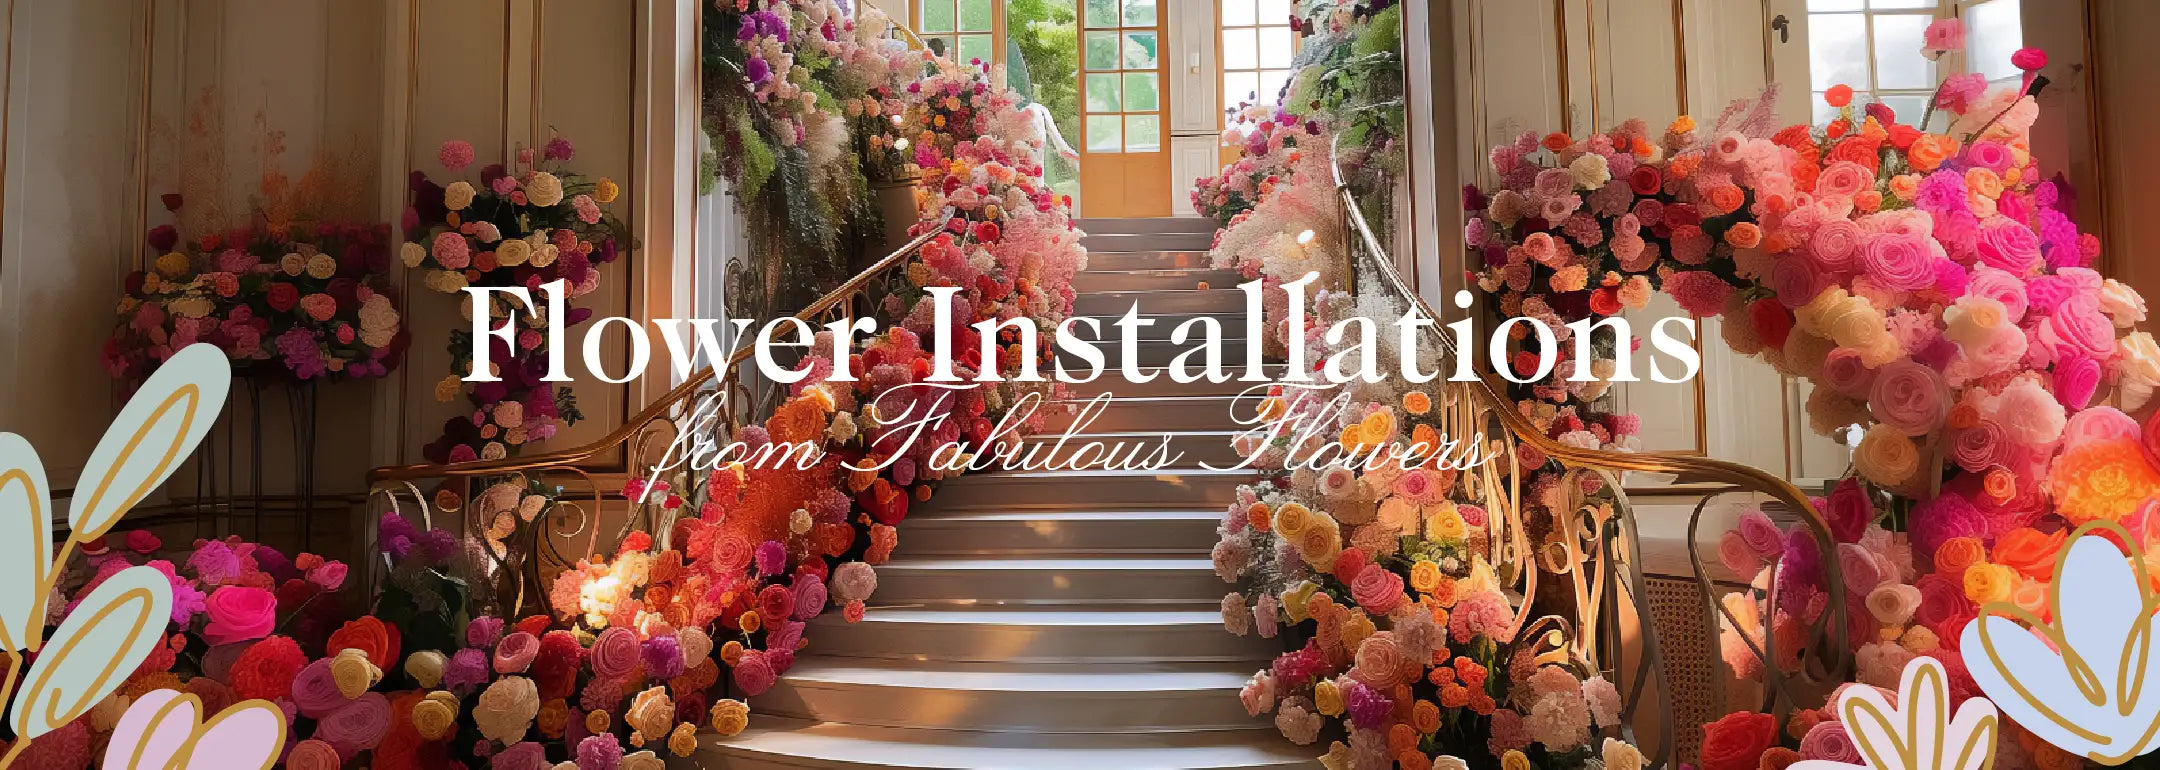 Opulent staircase adorned with vibrant flower installations featuring pink, orange, and purple blooms. Fabulous Flowers and Gifts.